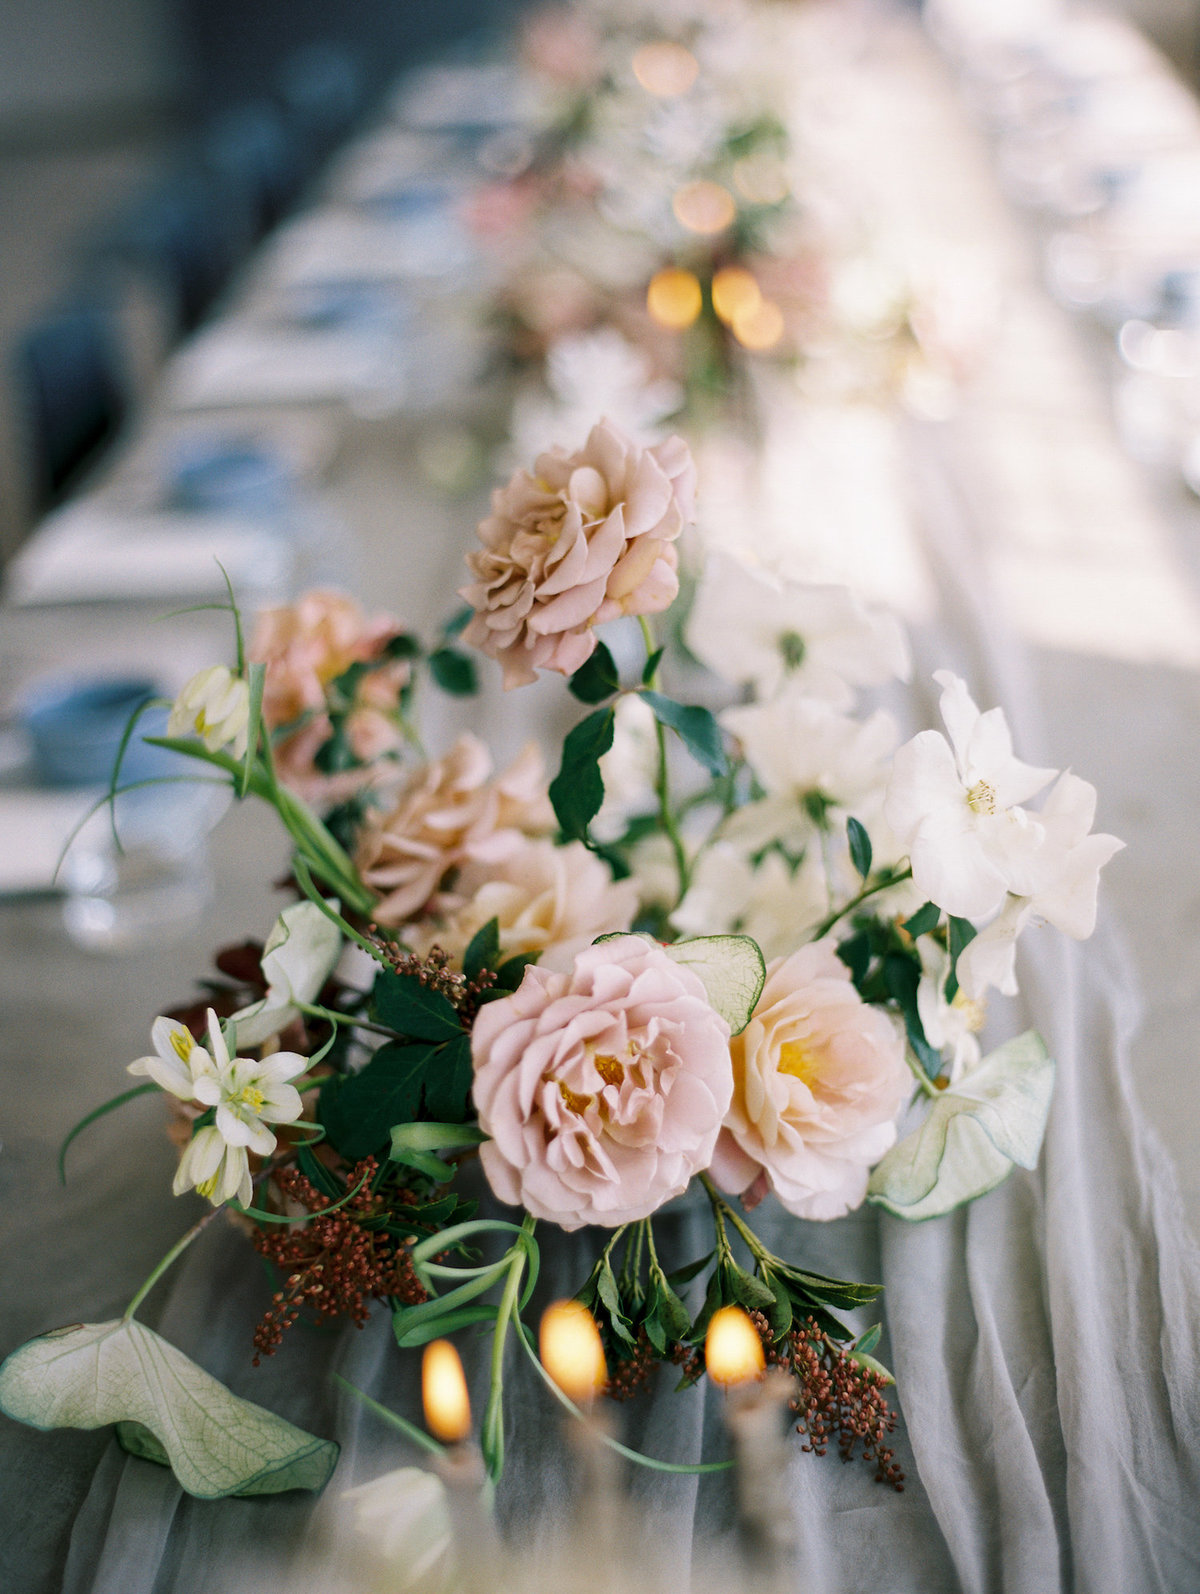 close up of garden roses on table during reception at wedding in DTLA